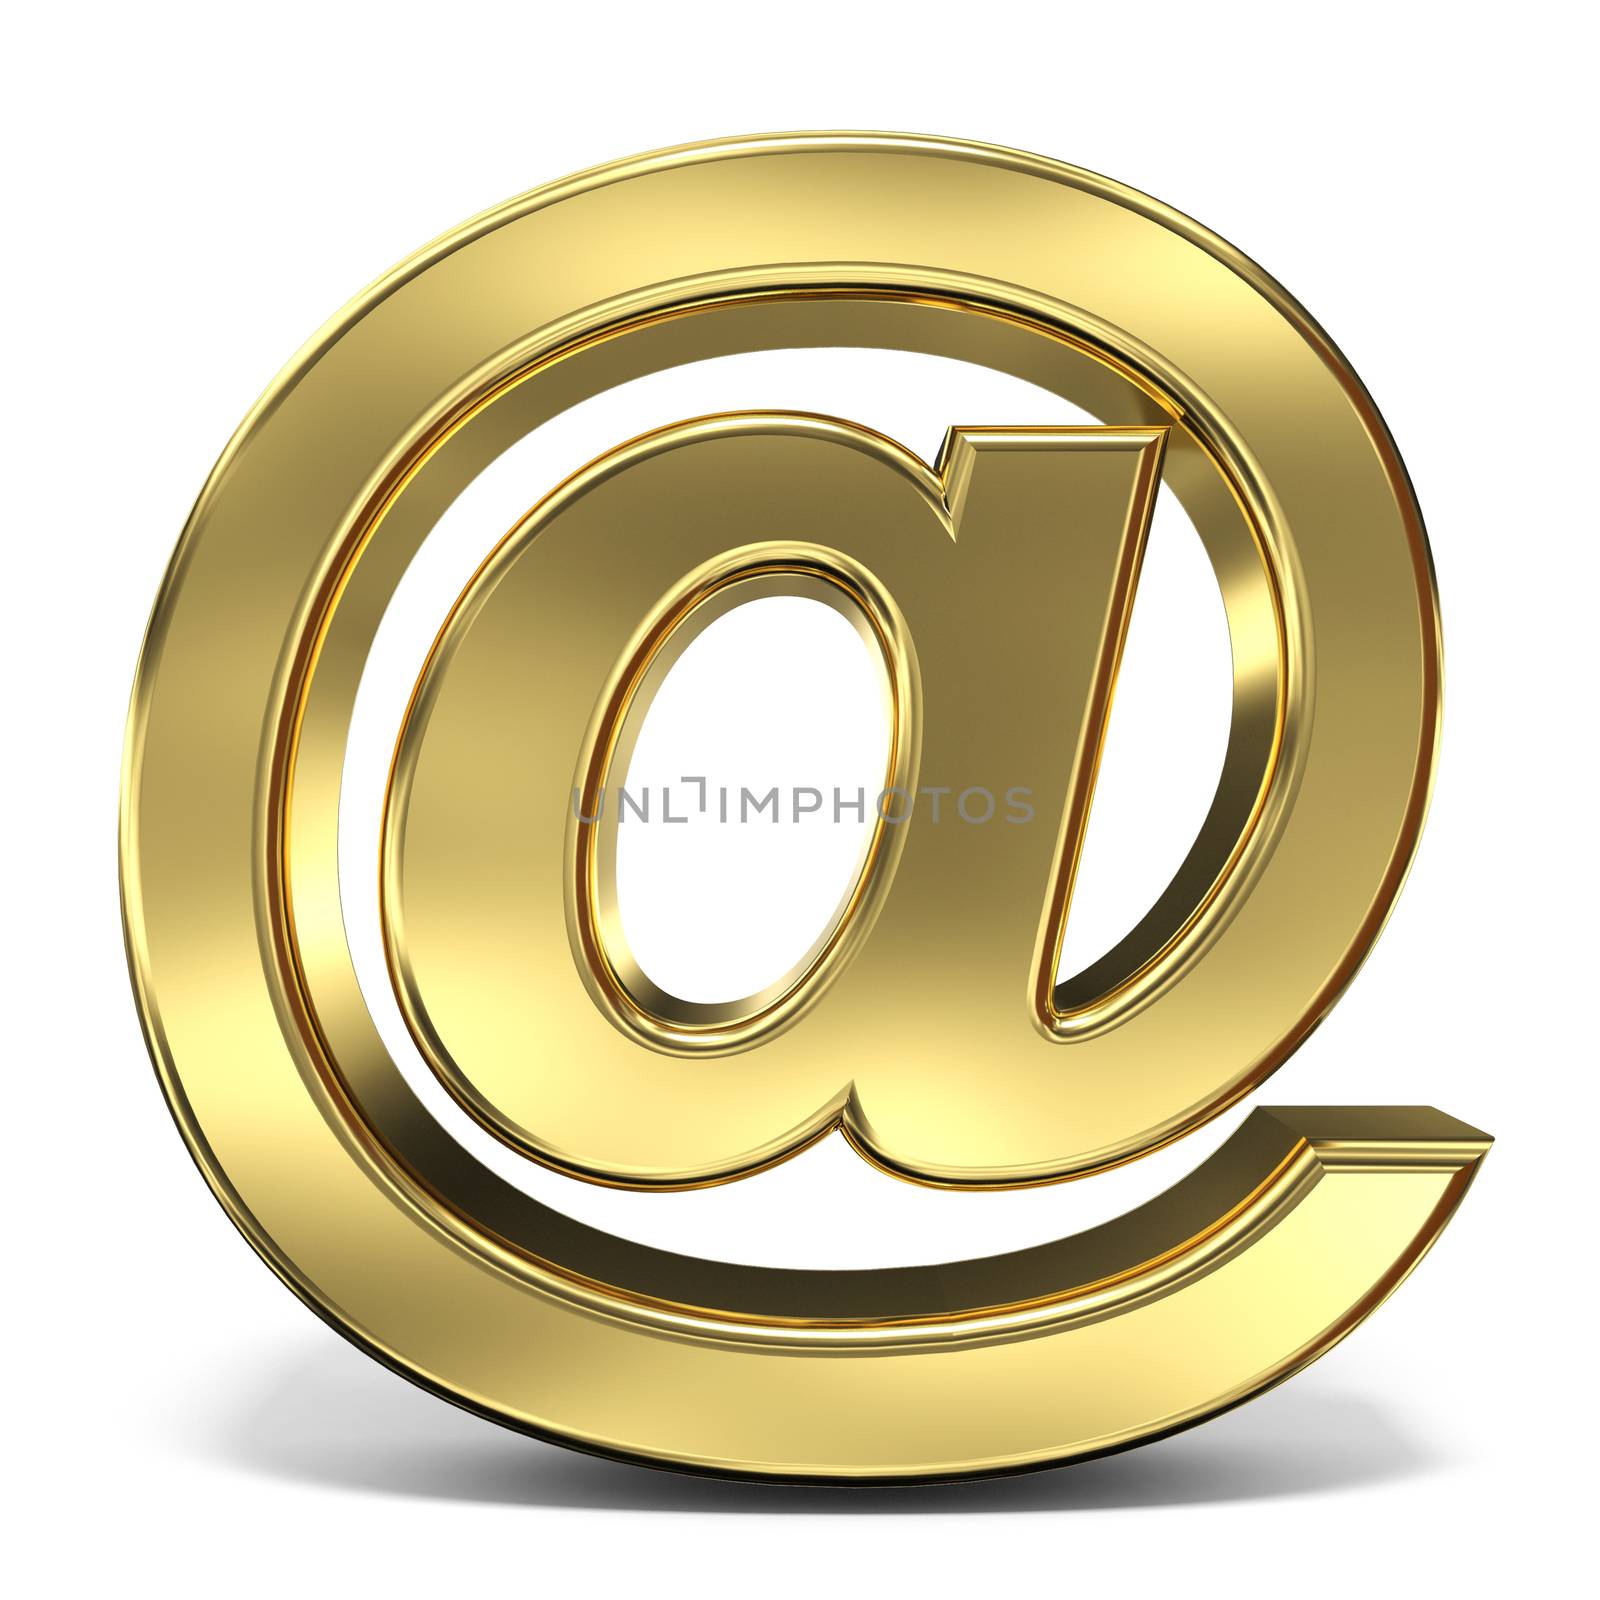 E-mail sign at symbol 3D rendering illustration isolated on white background